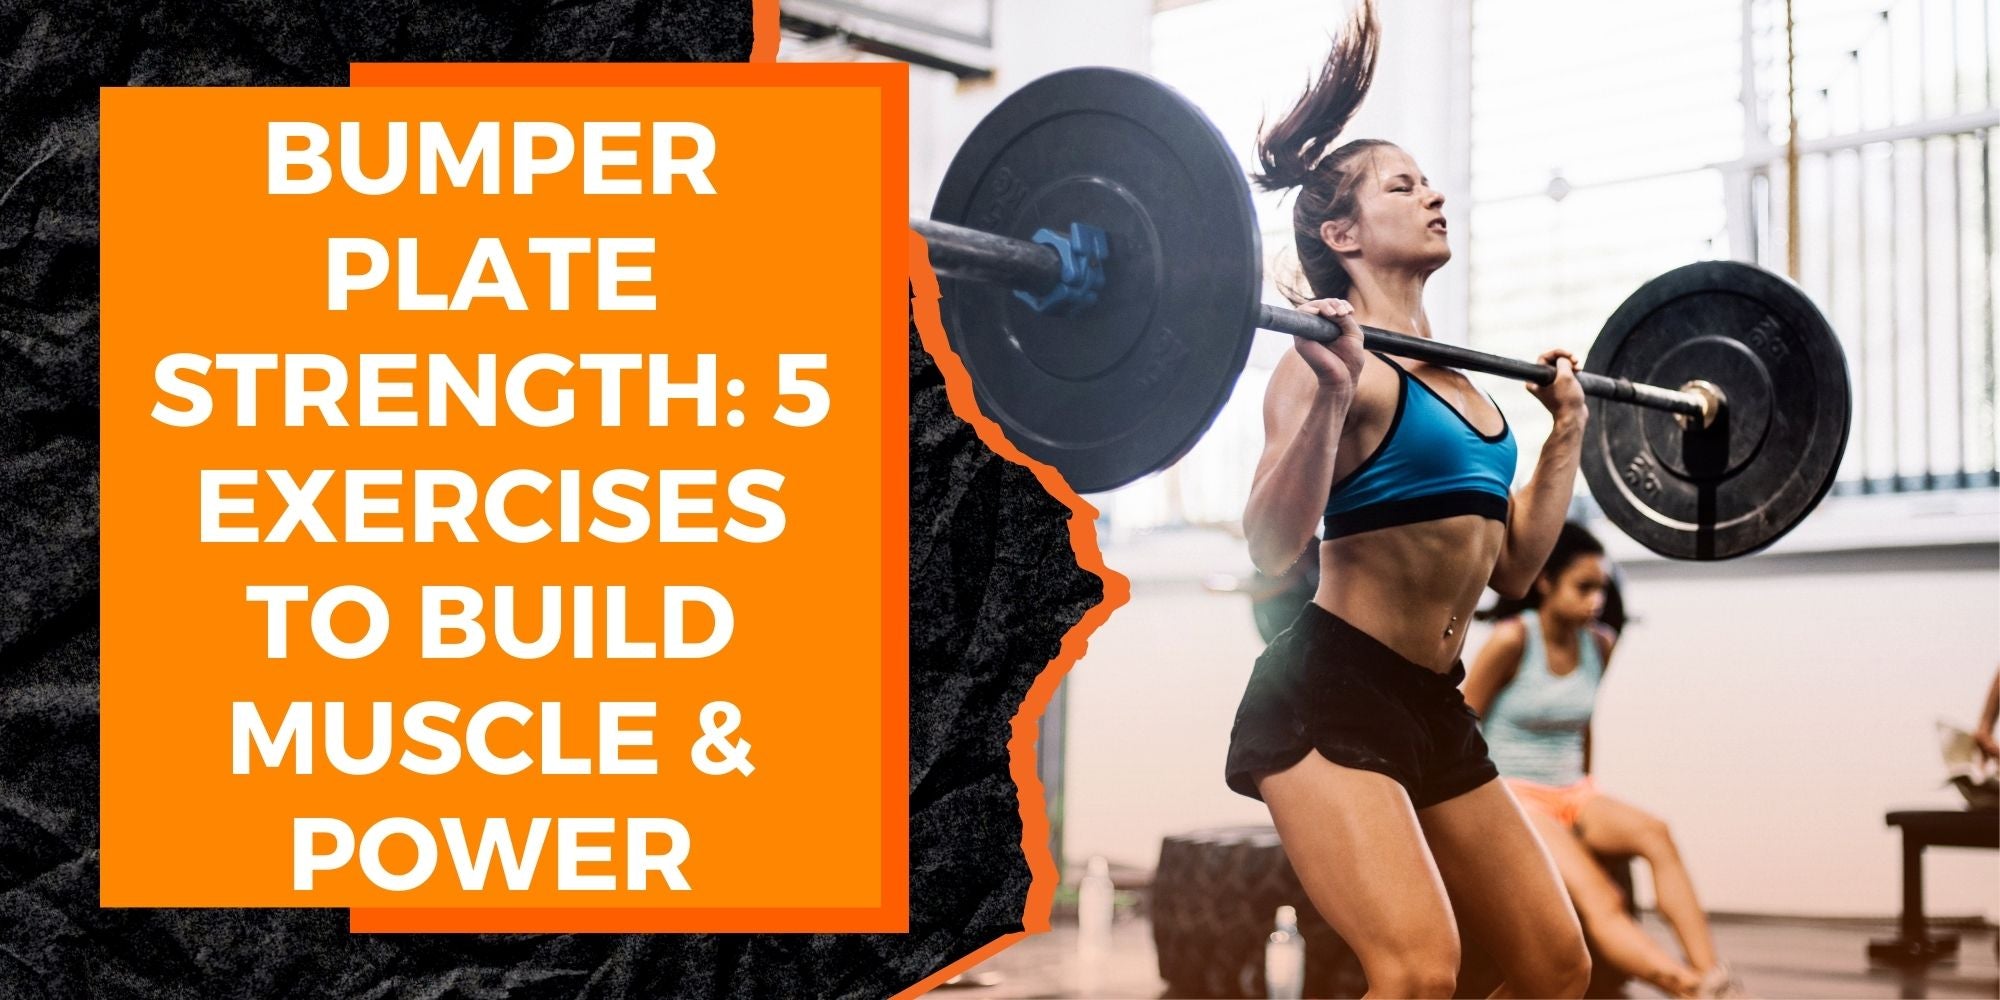 Bumper Plate Strength Training: 5 Exercises to Build Muscle and Increase Power